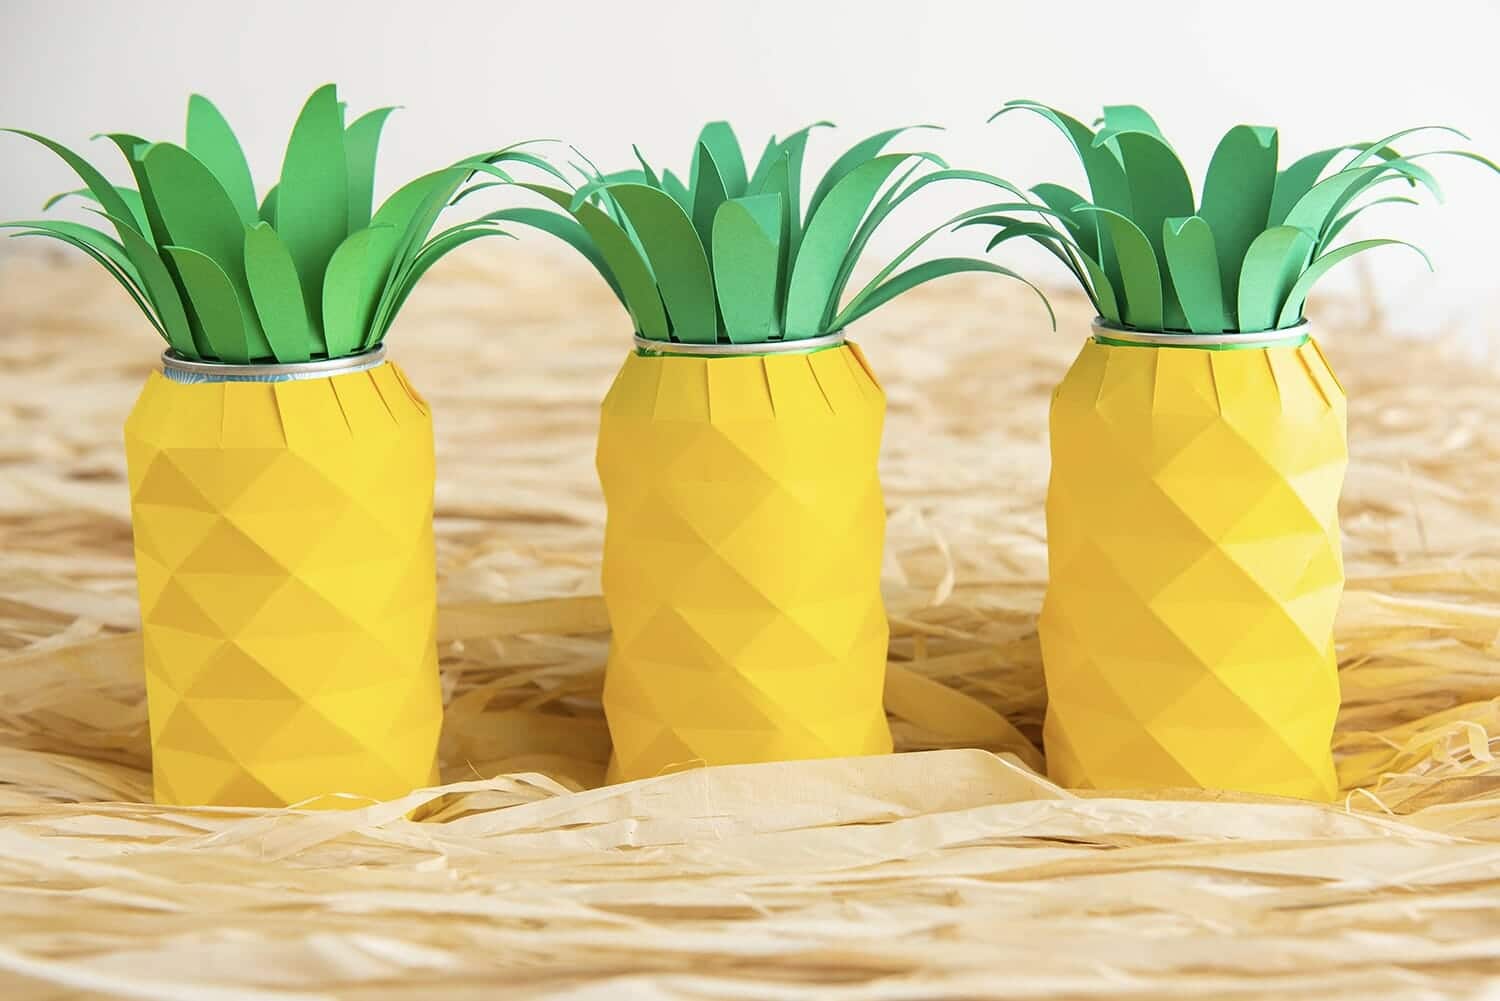 Download Pineapple Soda Can With Cricut Luau Party Decoration Free Svg Cut File Better Life Blog